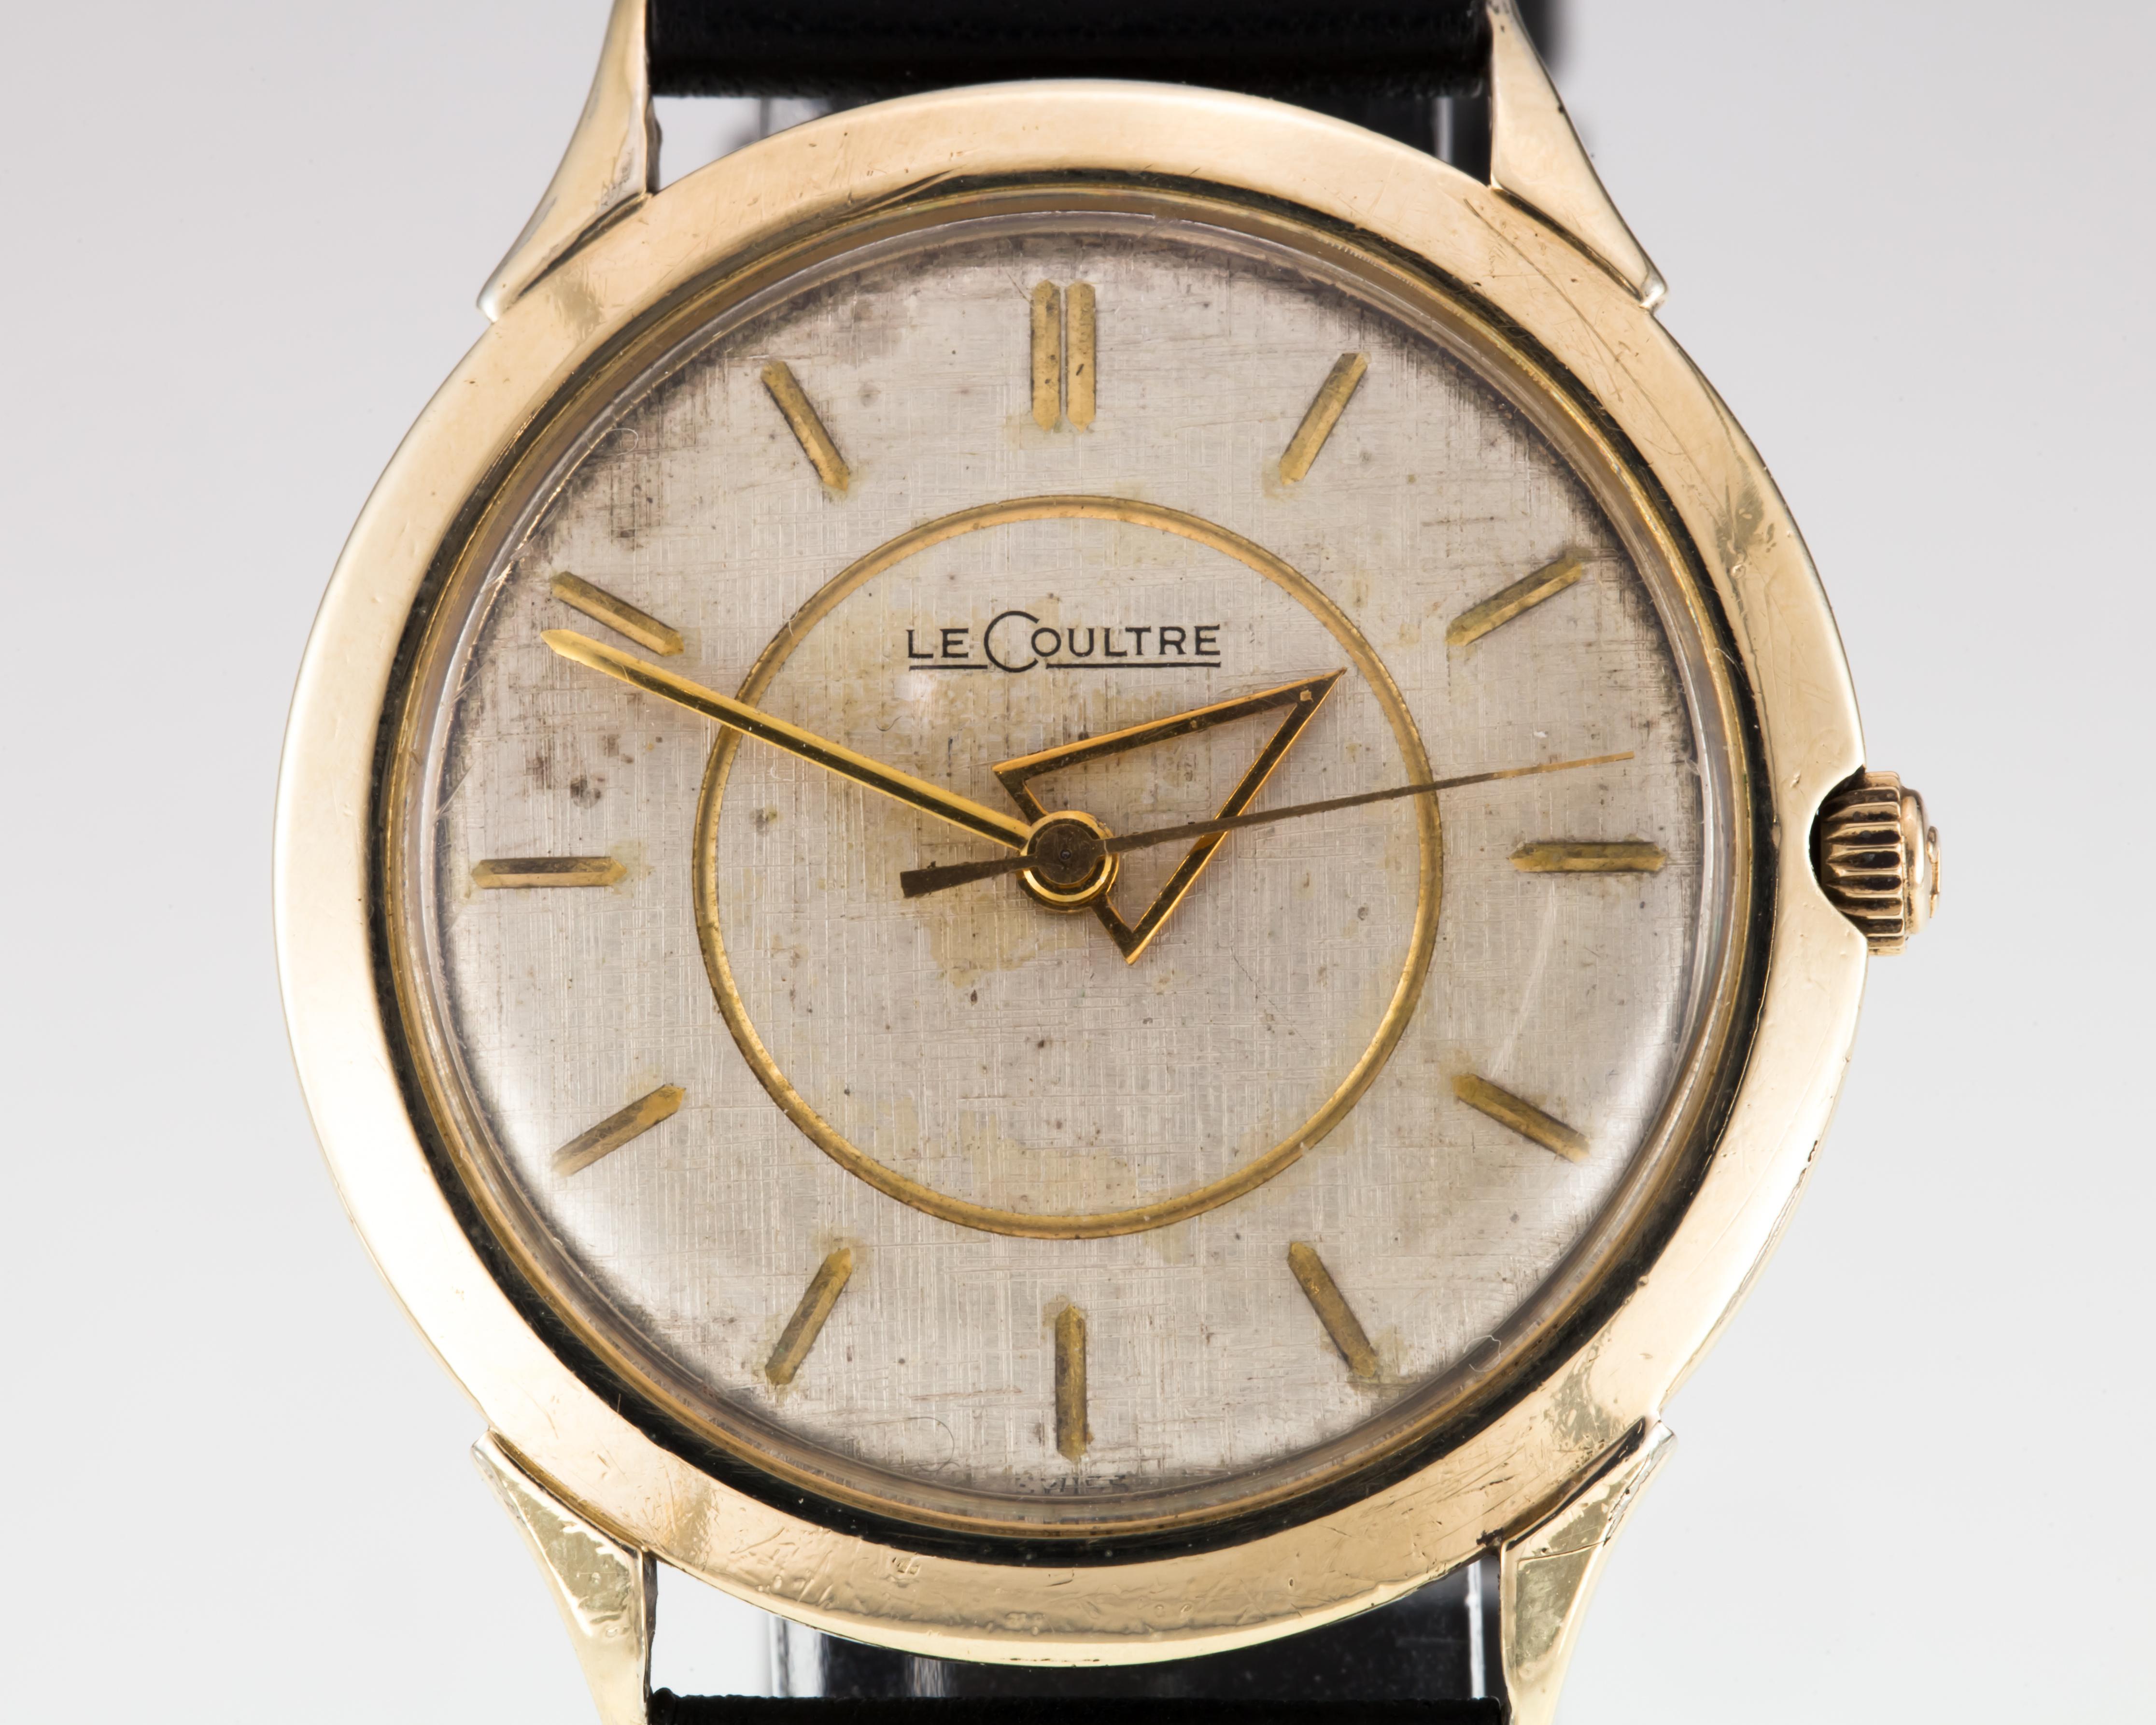 Le Coultre Men's Gold-Filled Hand-Winding Watch w/ Leather Strap Unique Hands!

Movement #K830/CW
Serial #12892XX
Case #703454

Gold-Filled Round Case
33 mm in Diameter (34 mm w/ Crown)
Lug-to-Lug Distance = 40 mm
Lug-to-Lug Width = 18